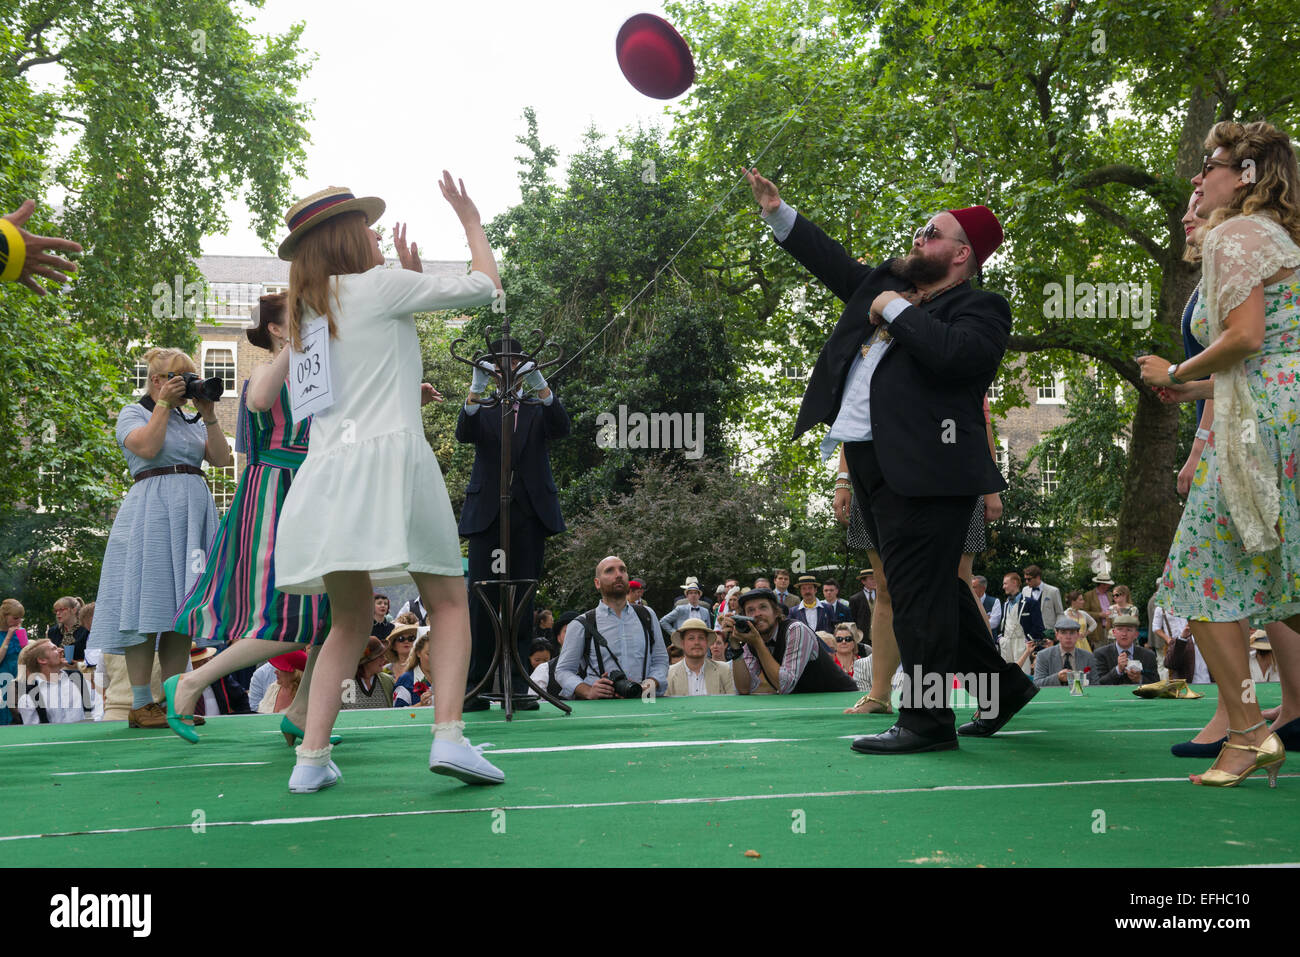 The 10 Anniversary of the Chap Olympiad. A sartorial gathering of chaps and chapesses in Bloomsbury London. Various Chap sports are held at a picnic in the square. Here people compete in Beach Volleybowler: volleyball with a red bowler hat, London, England Stock Photo